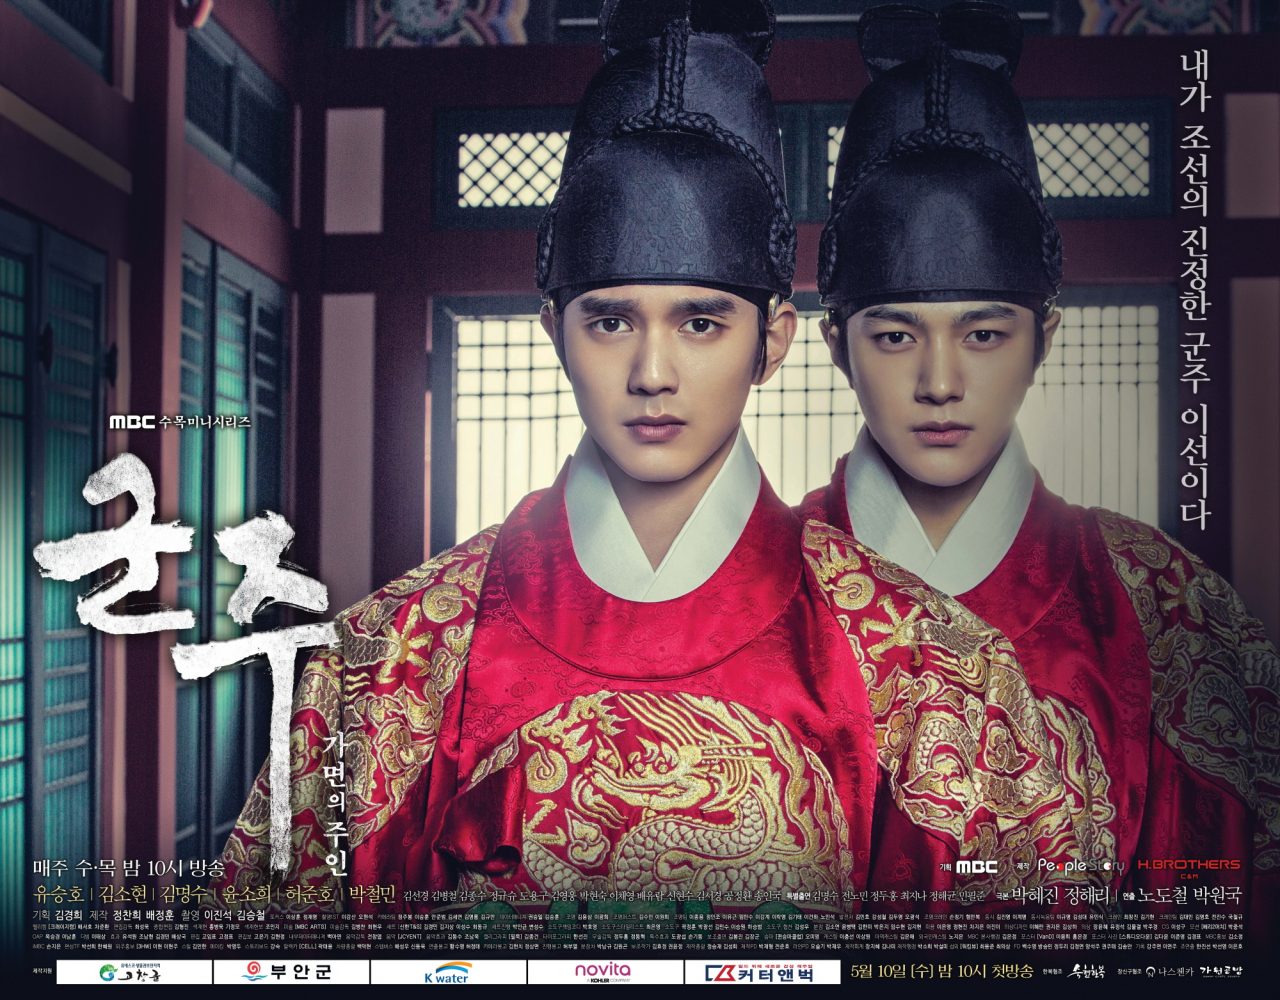 Mặt nạ quân chủ - The Emperor: Owner of the Mask (2017)